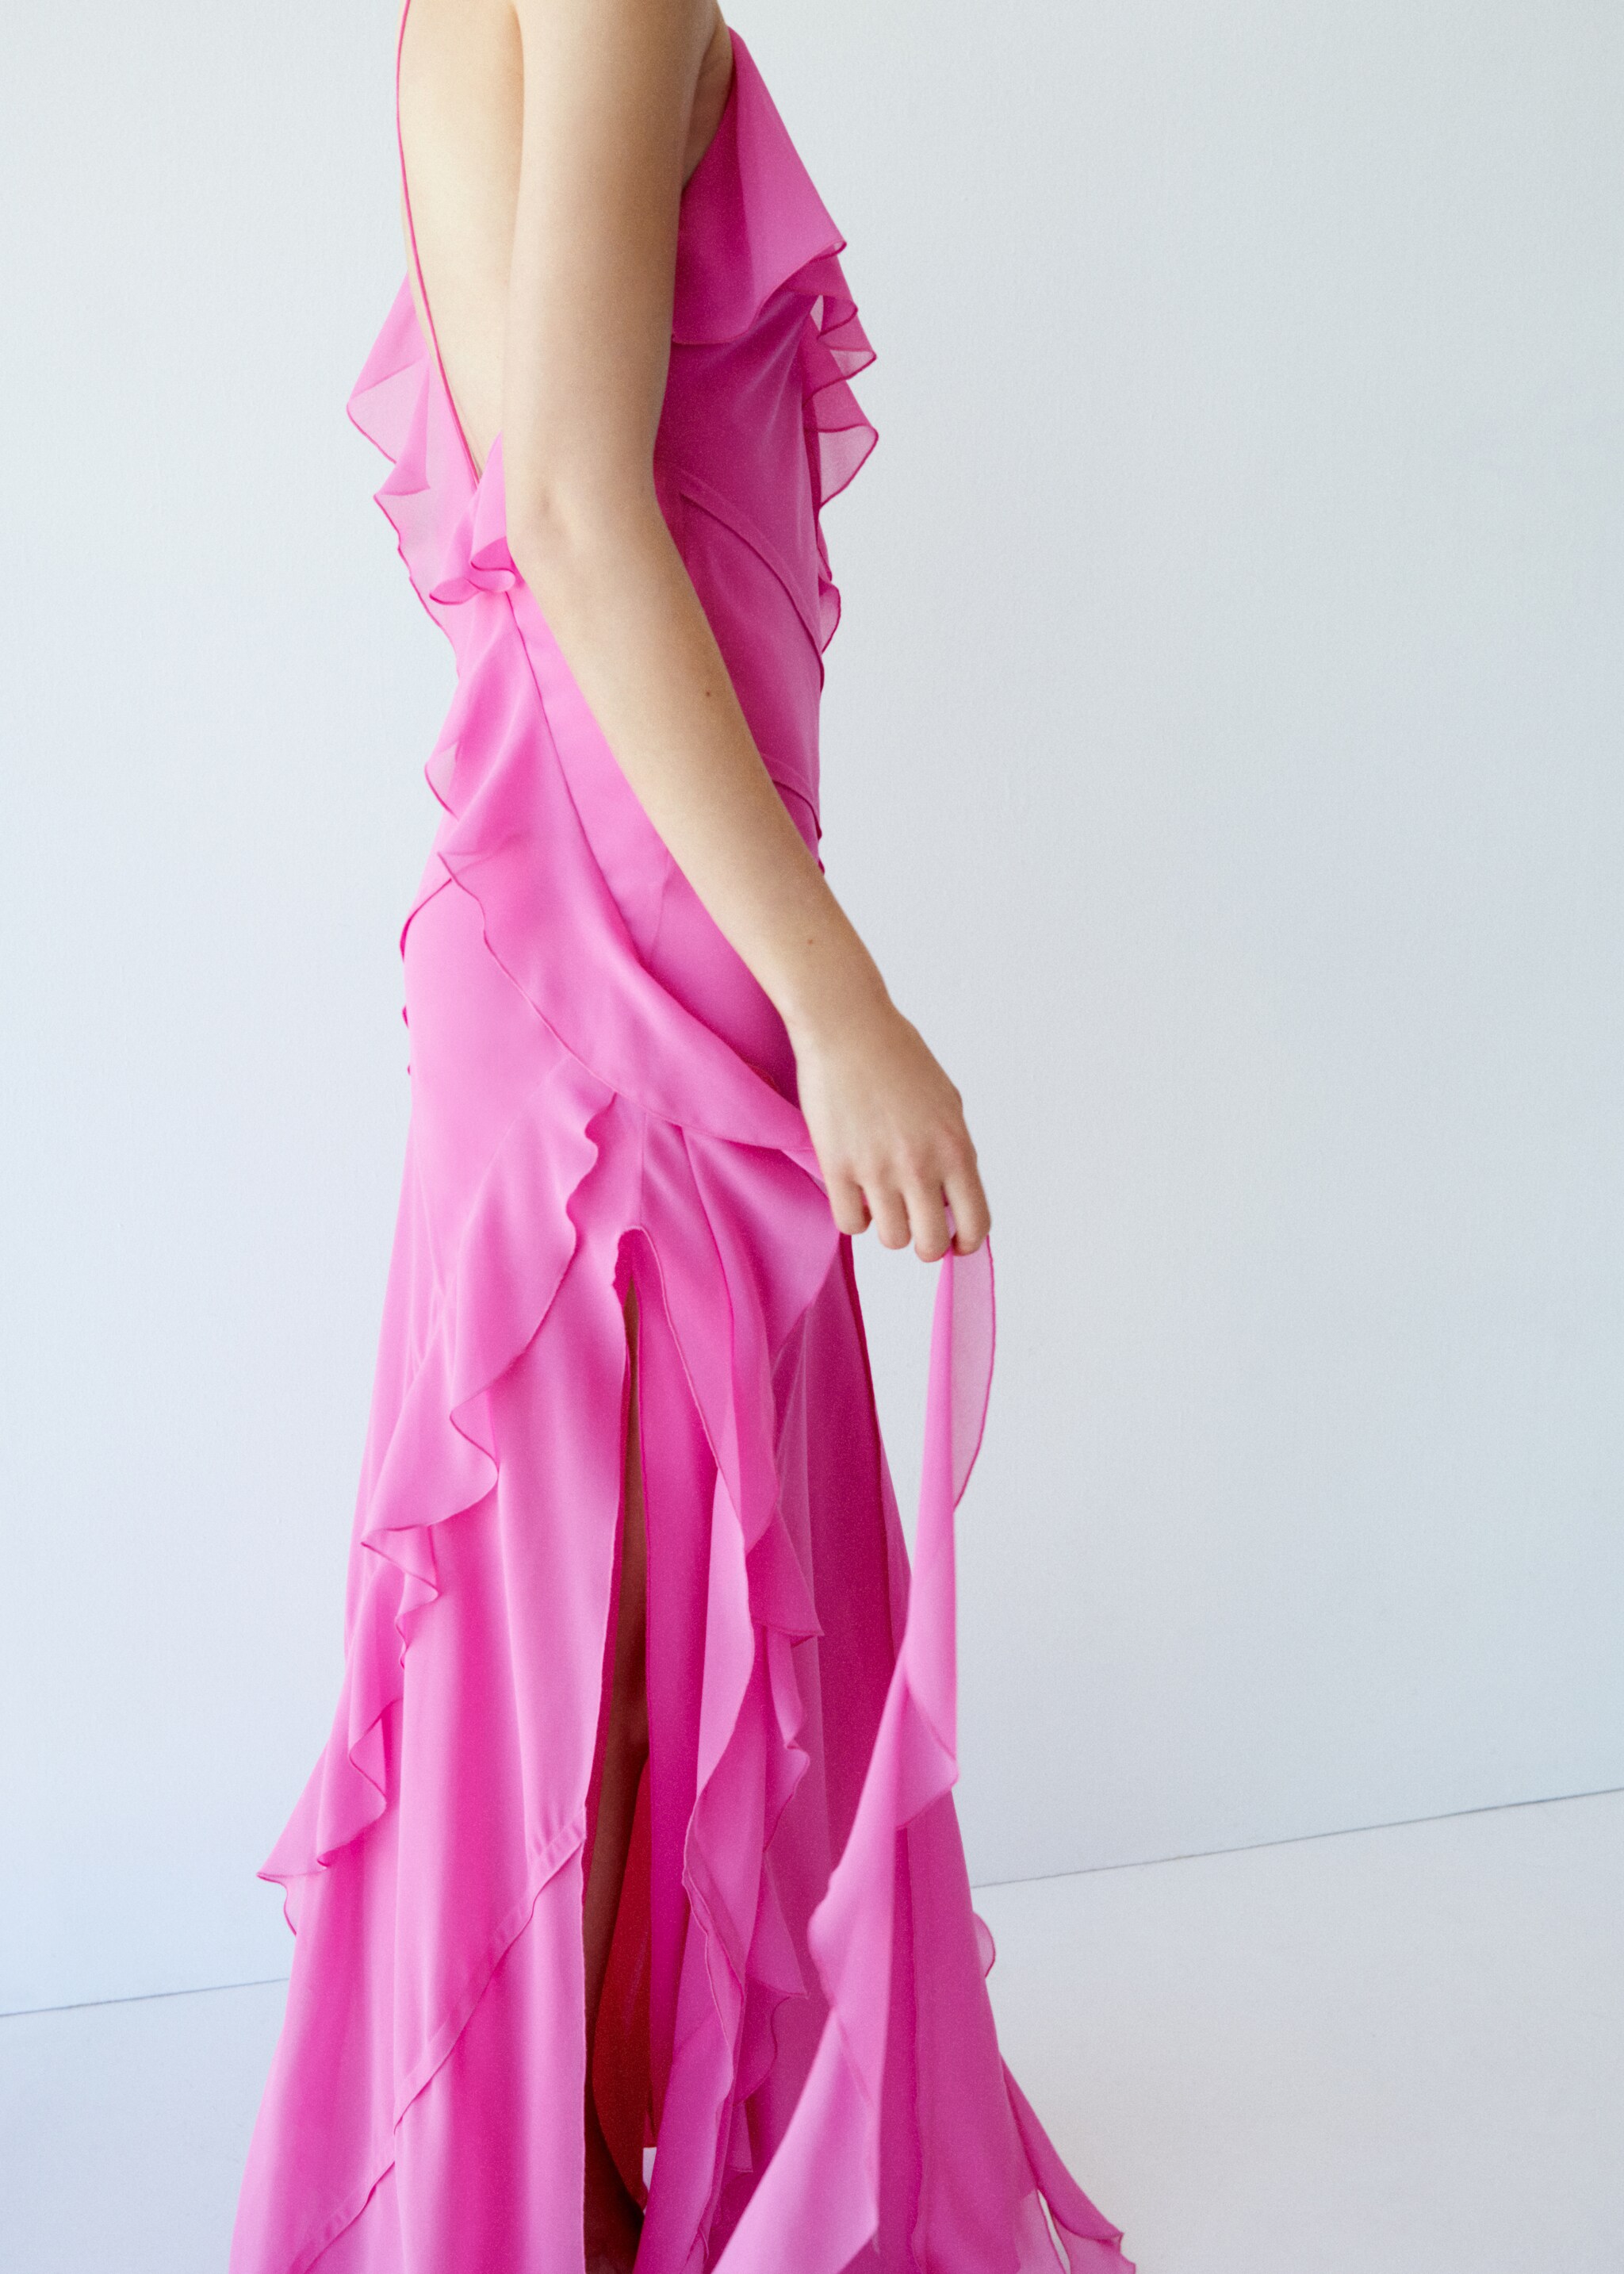 Ruffles slit dress - Details of the article 7